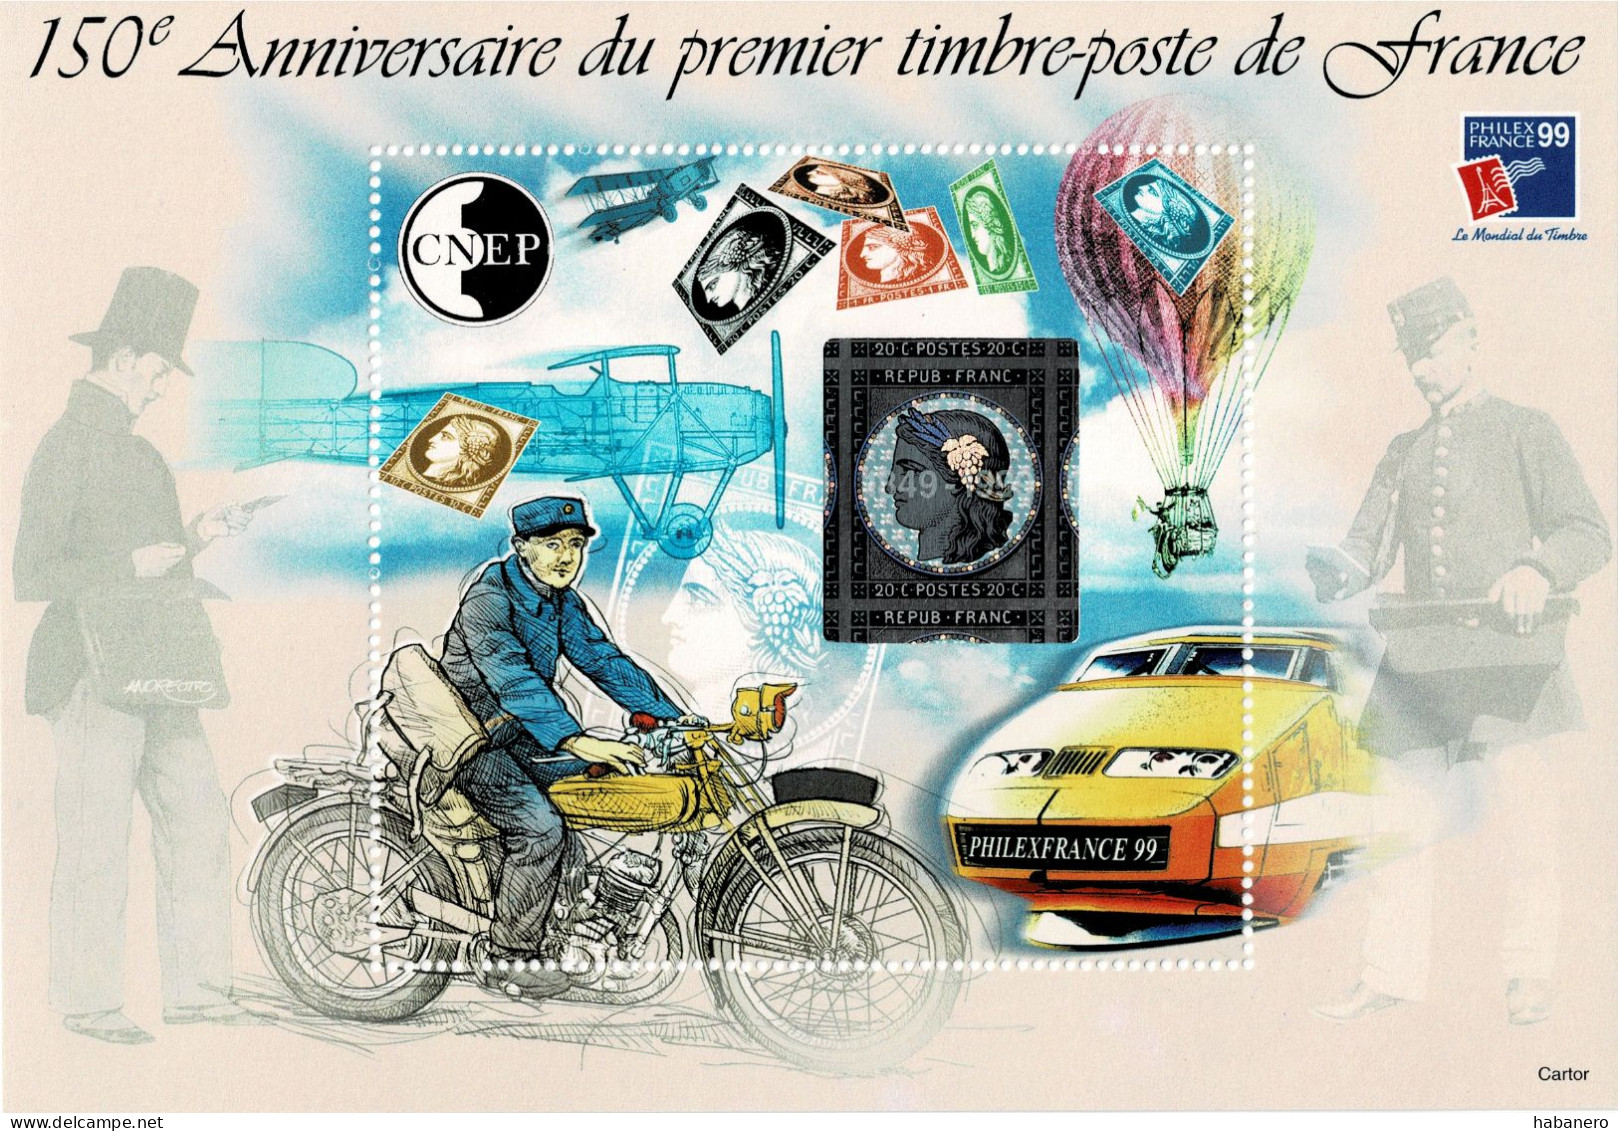 FRANCE 1999 YT CNEP30 150th ANNIVERSARY OF FRENCH STAMPS PHILEX FRANCE 99 MINT MINIATURE SHEET ** - Philatelic Exhibitions